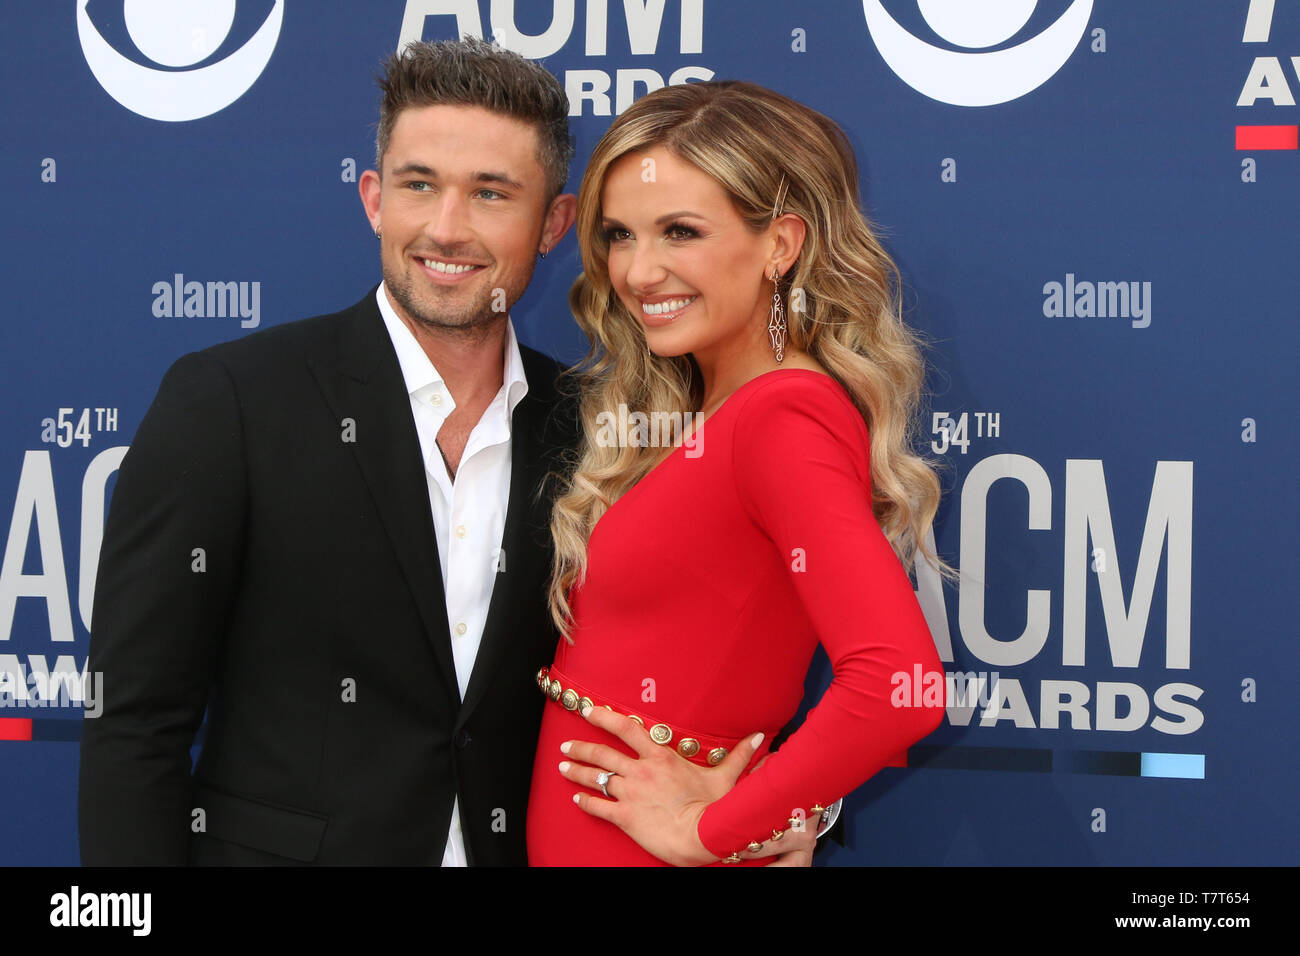 54th Academy of Country Music Awards at the MGM Grand Garden Arena on April 7, 2019 in Las Vegas, NV  Featuring: Michael Ray, Carly Pearce Where: Las Vegas, Nevada, United States When: 07 Apr 2019 Credit: Nicky Nelson/WENN.com Stock Photo